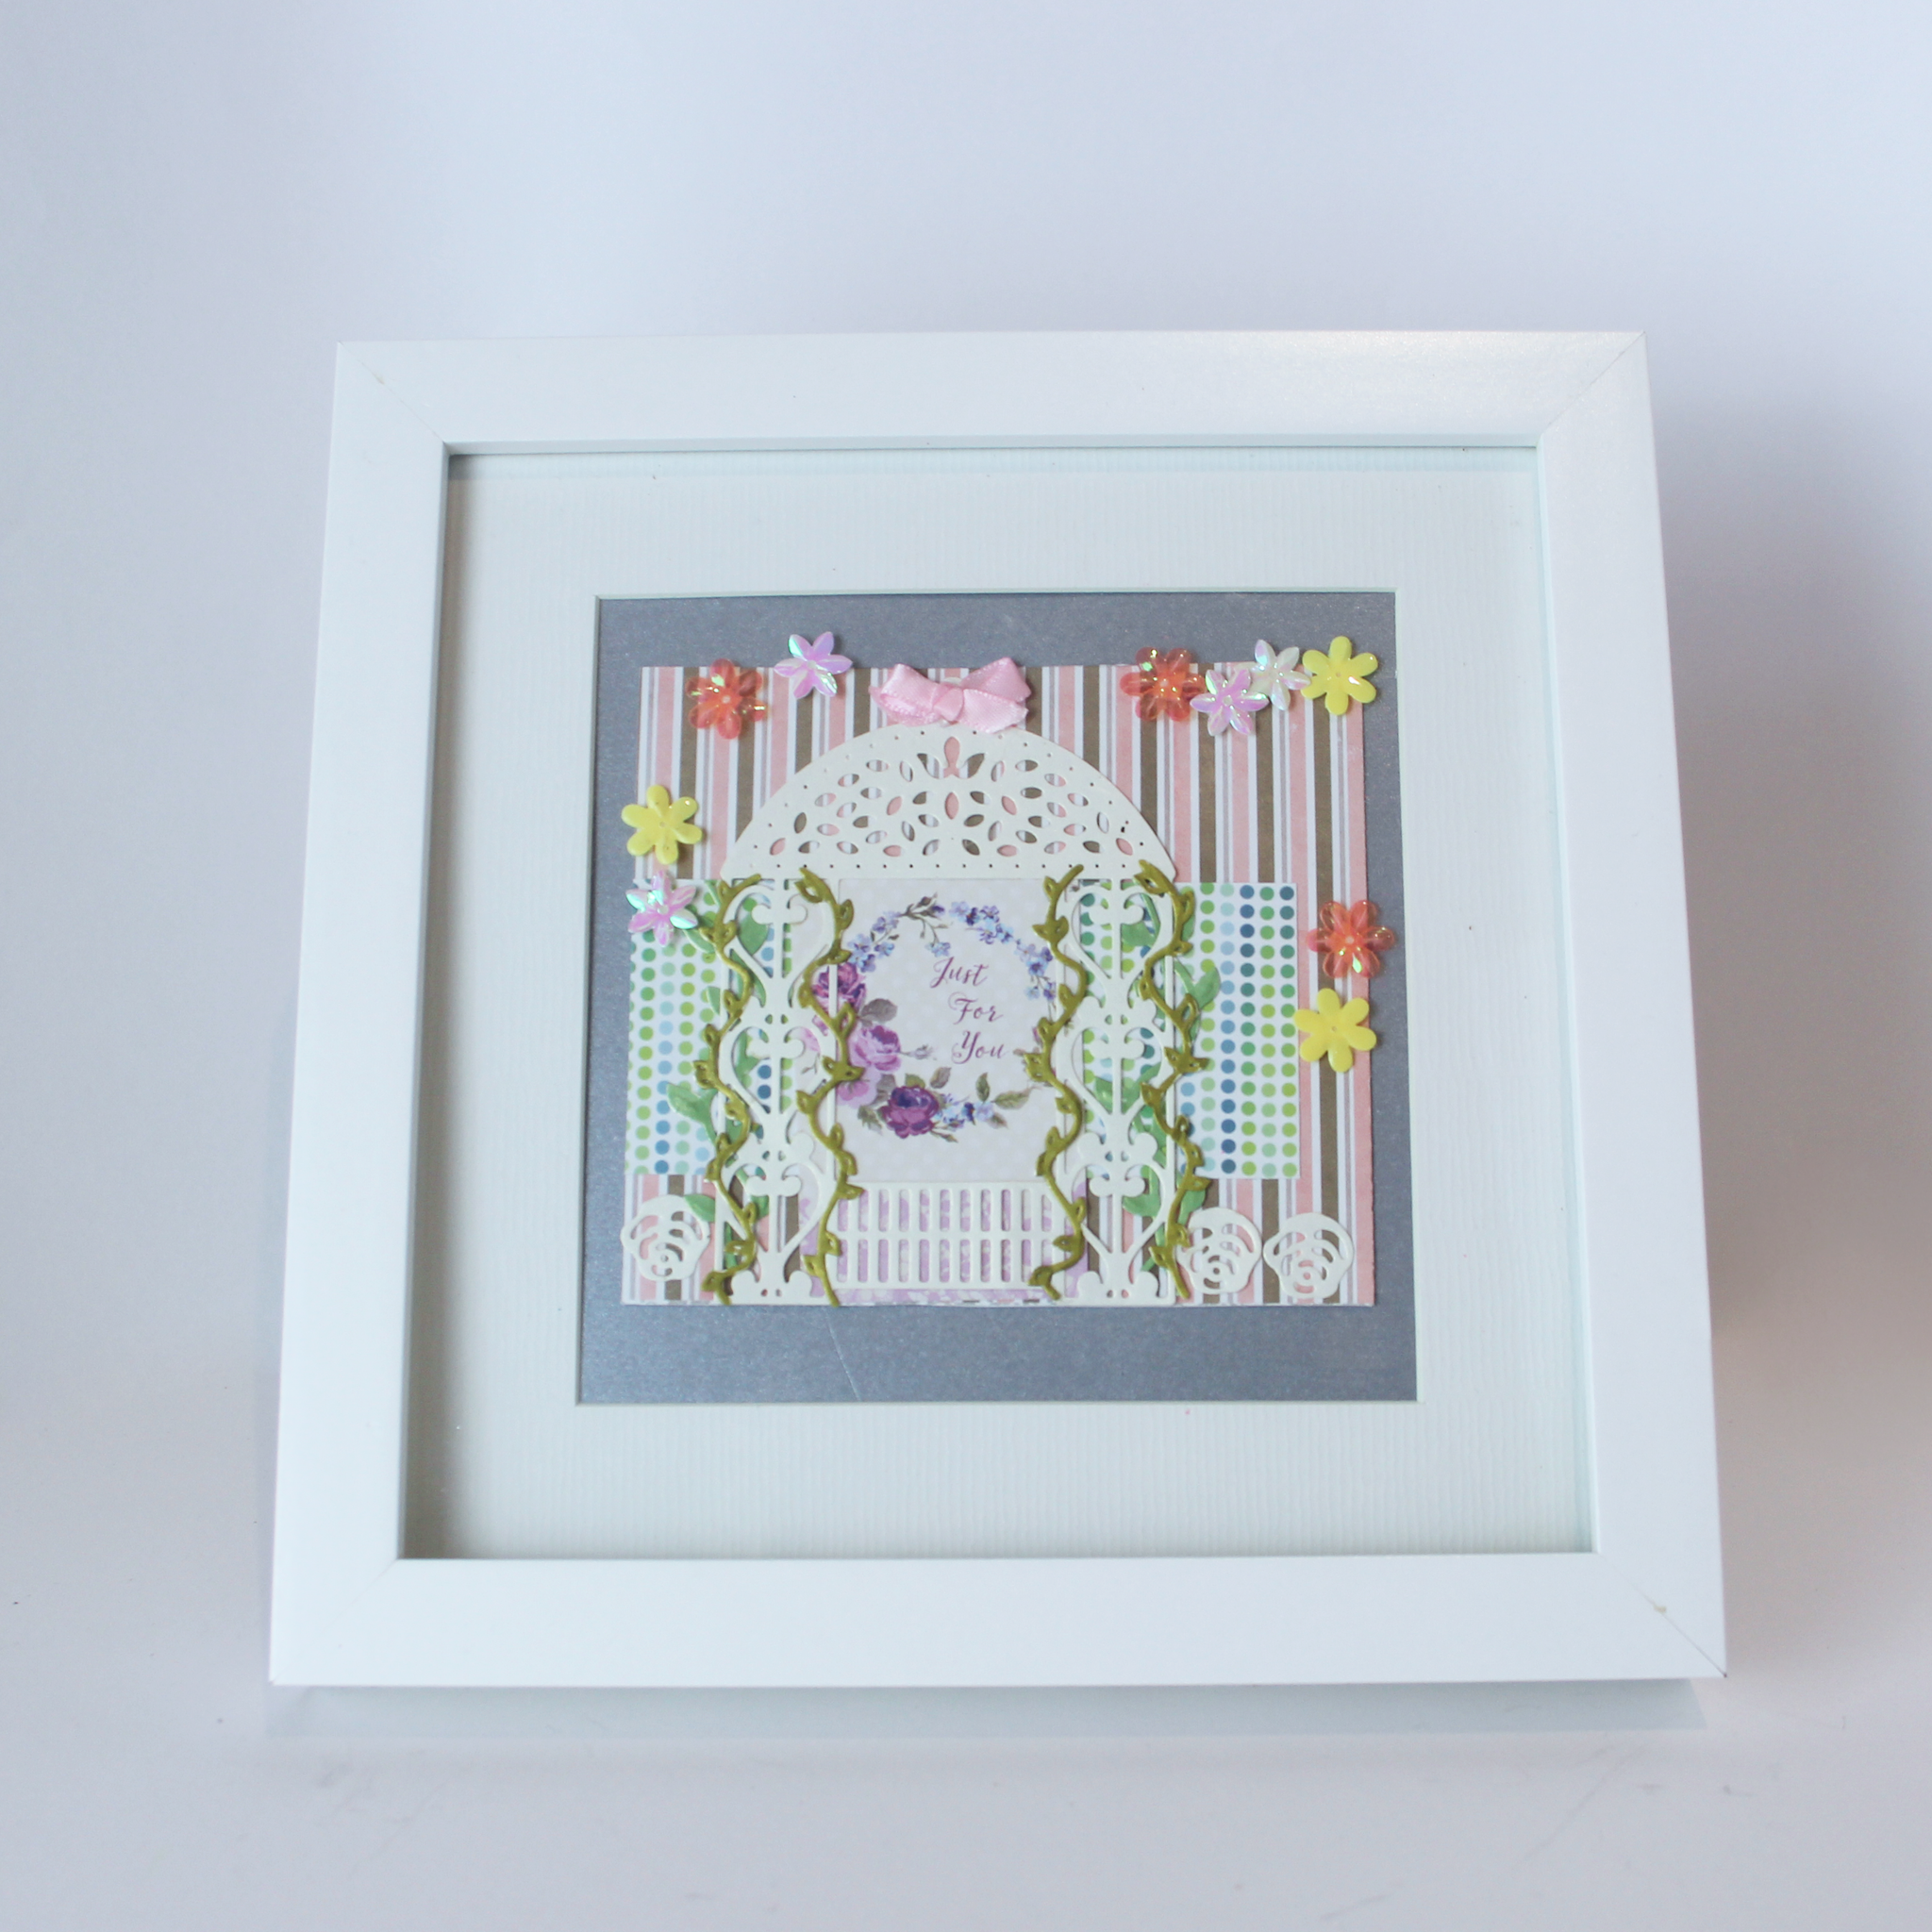 Just For You Mixed Media Botanical Frame